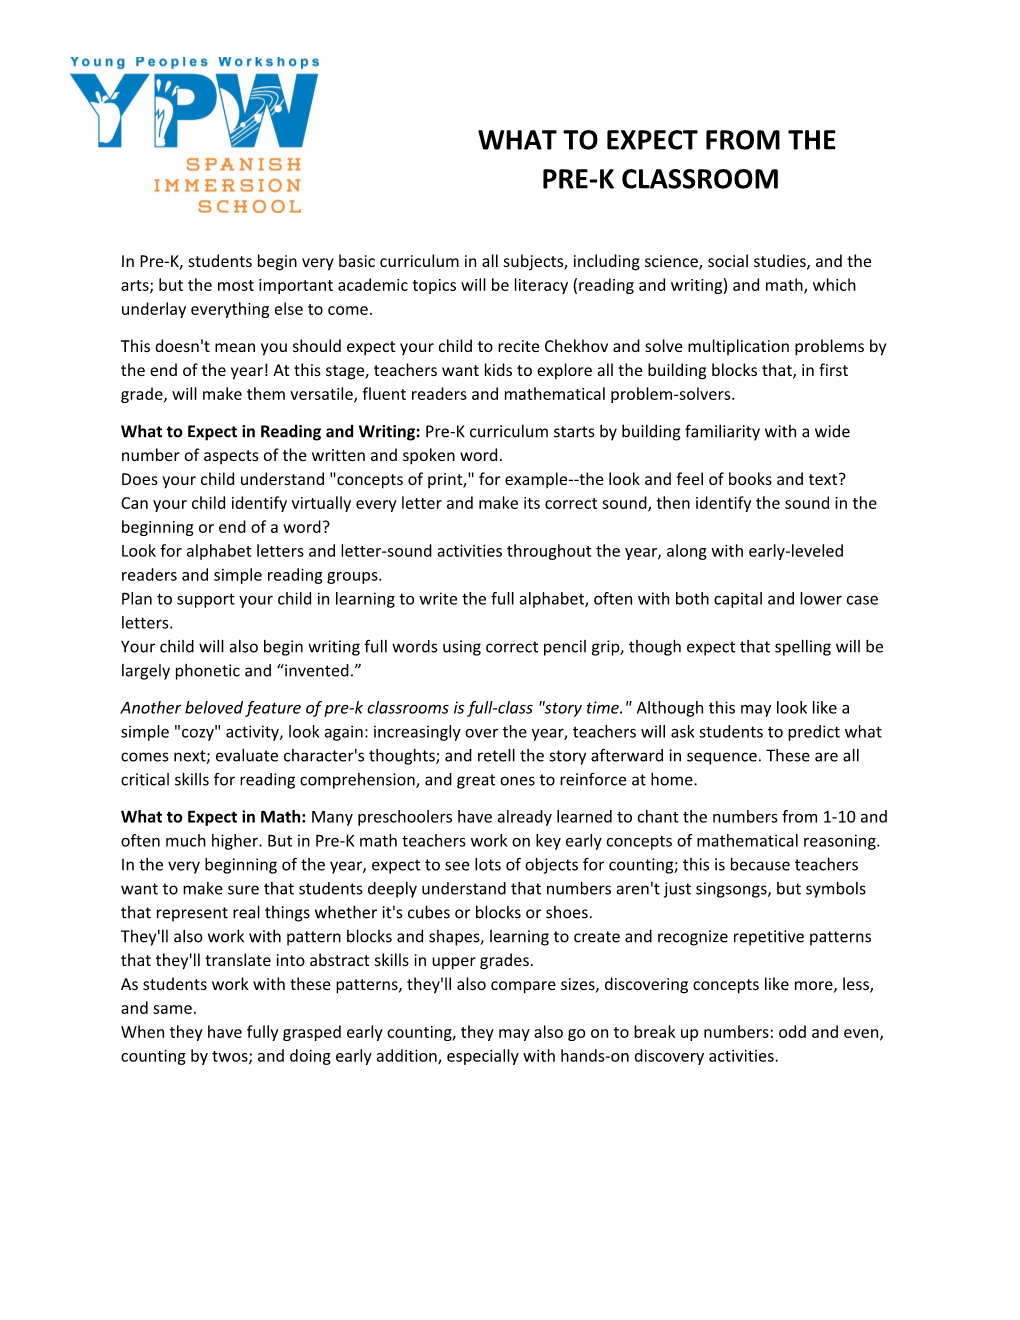 What to Expect from the Pre-Kclassroom